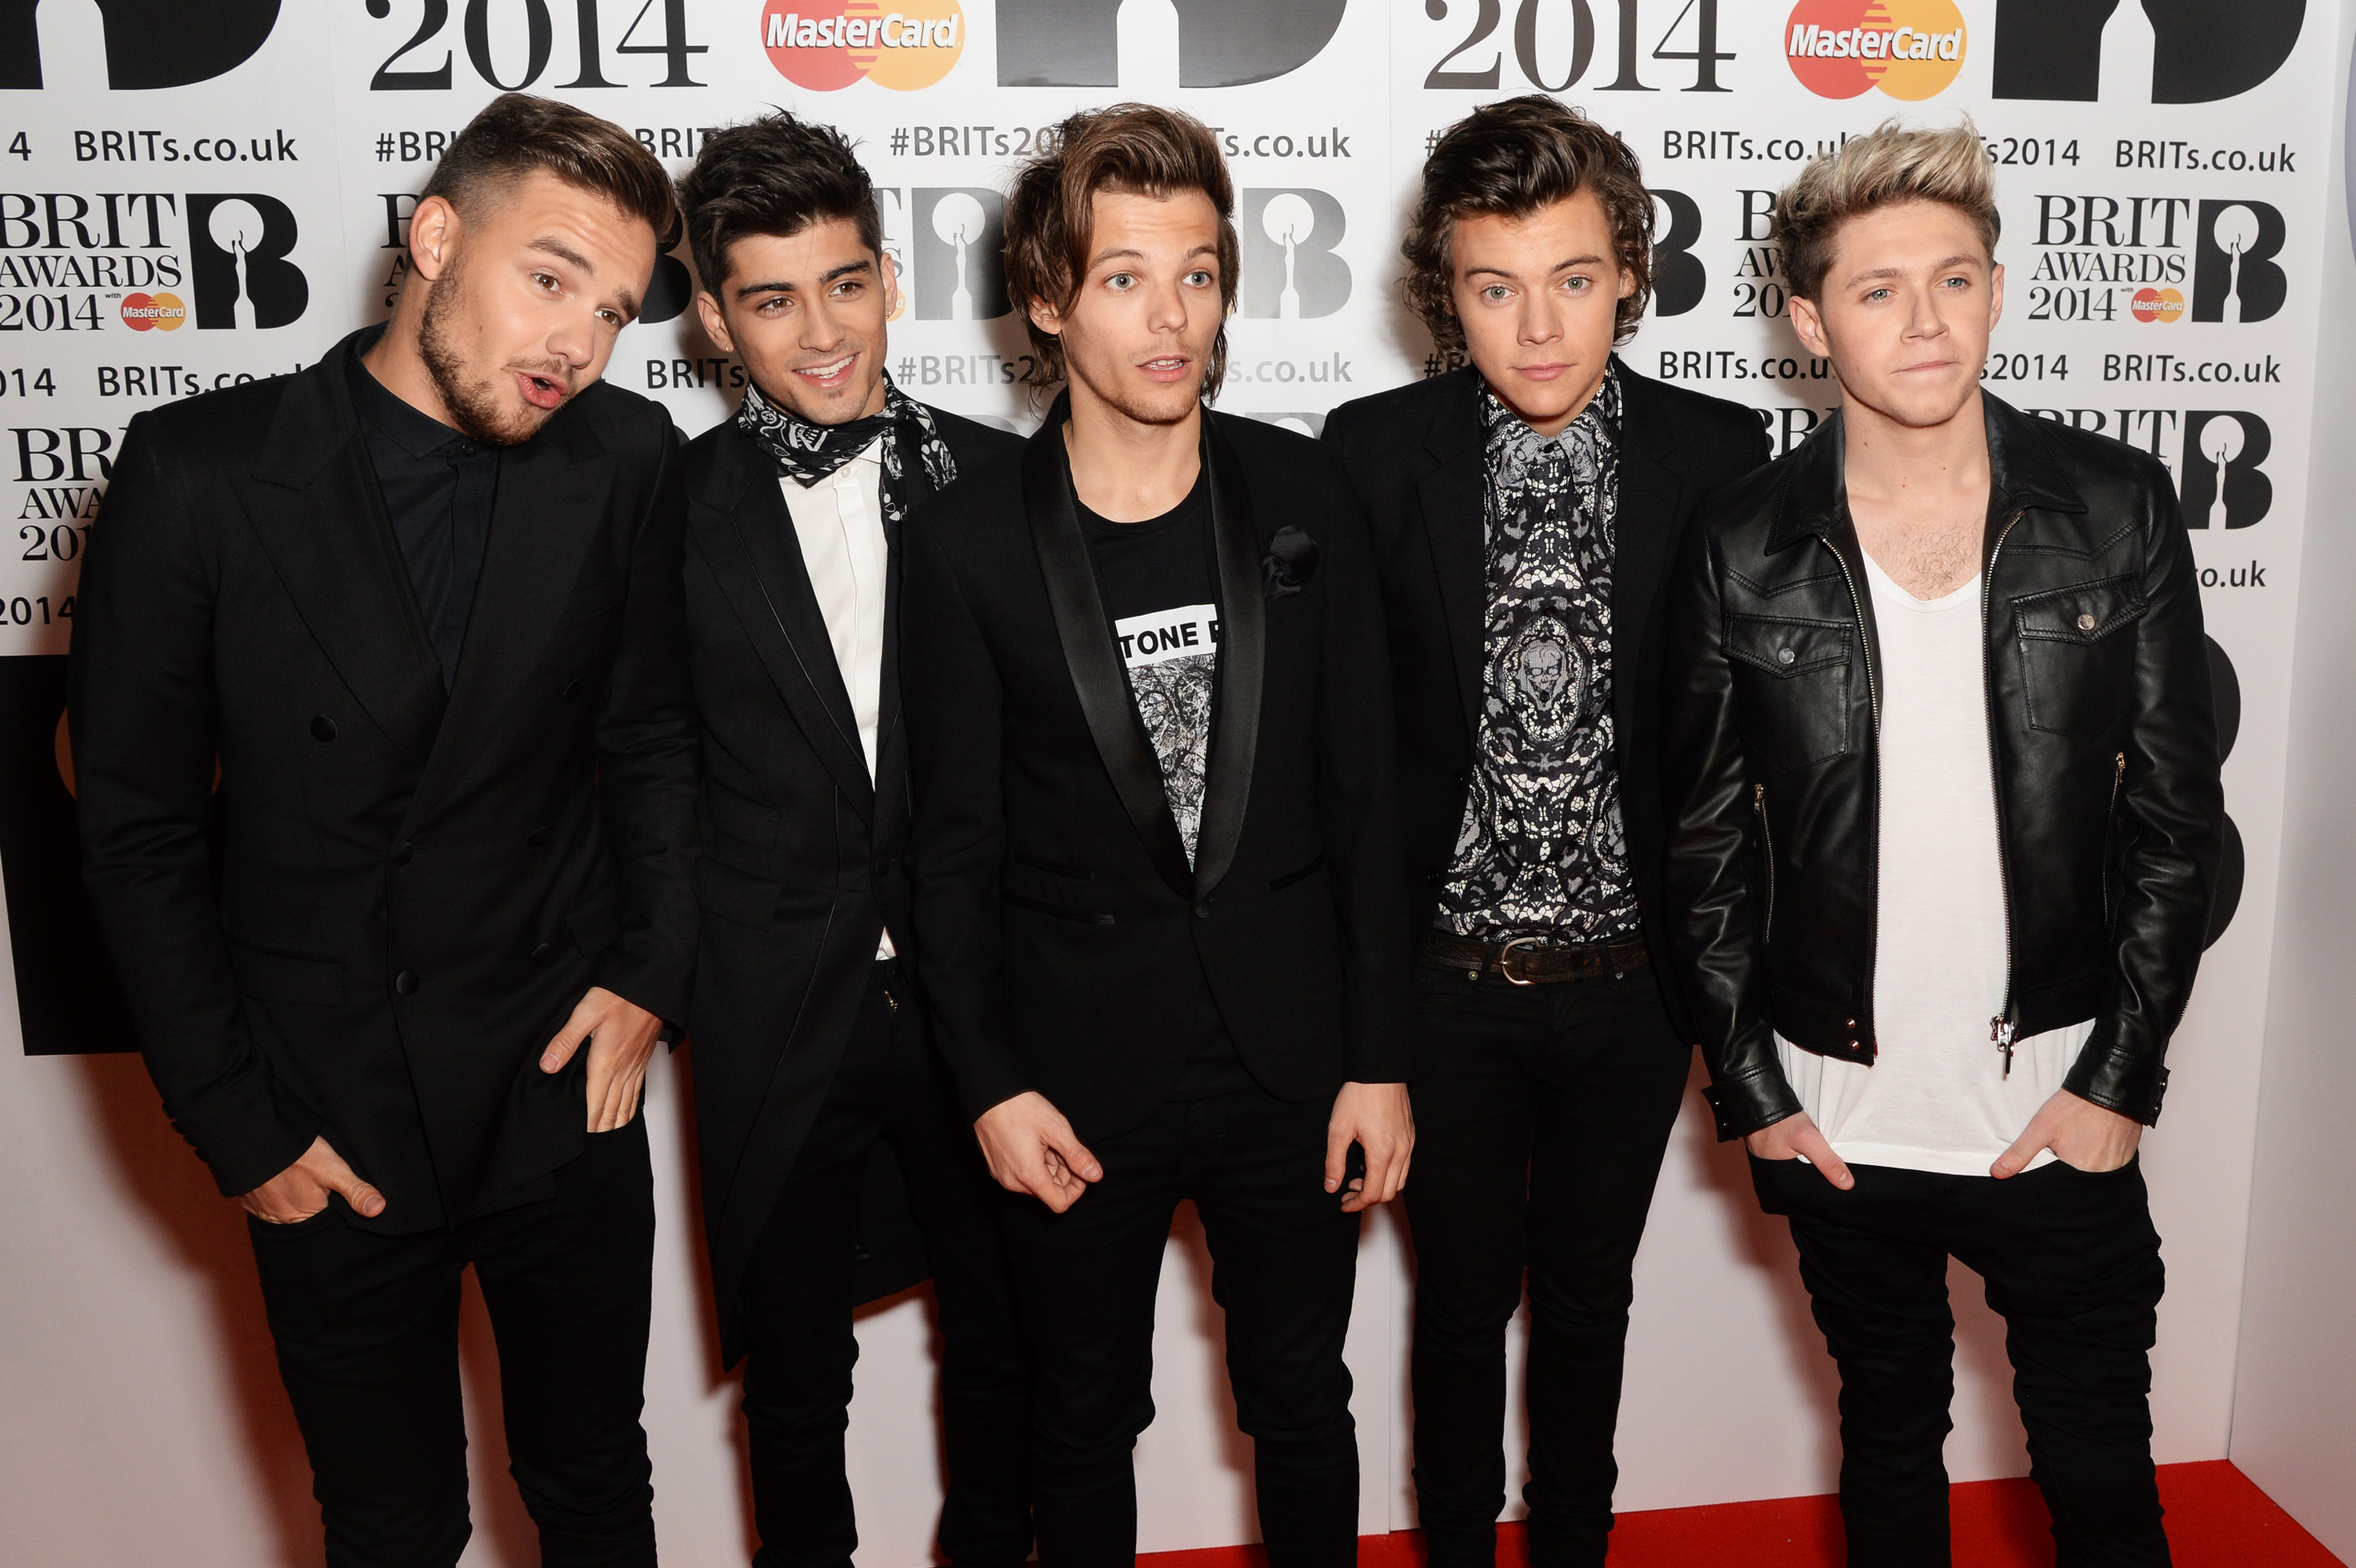 Liam Payne, Zayn Malik, Louis Tomlinson, Harry Styles and Niall Horan of One Direction attend The BRIT Awards 2014 at The O2 Arena on February 19, 2014 in London, England. (Dave J Hogan--Getty Images)